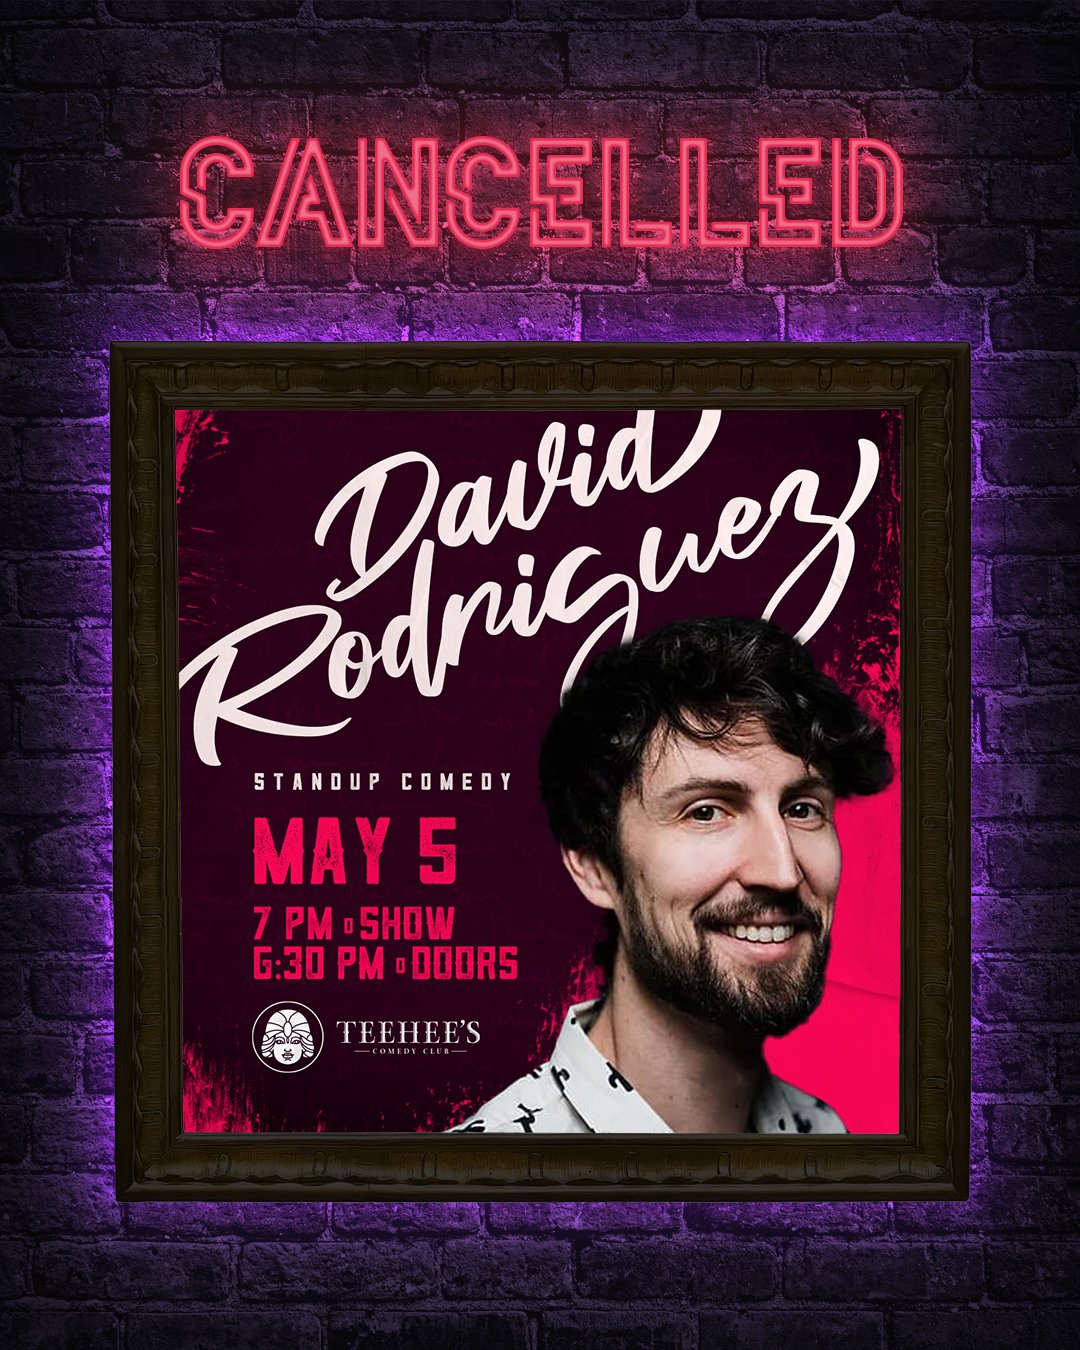 ⚠🎤⚠ Hello everyone,
Unfortunately tonight's show with David Rodriguez is cancelled tonight. His flight was delayed more than a handful of times and he won't make it into town in time to perform.
For everyone who purchased tickets, you can expect to 